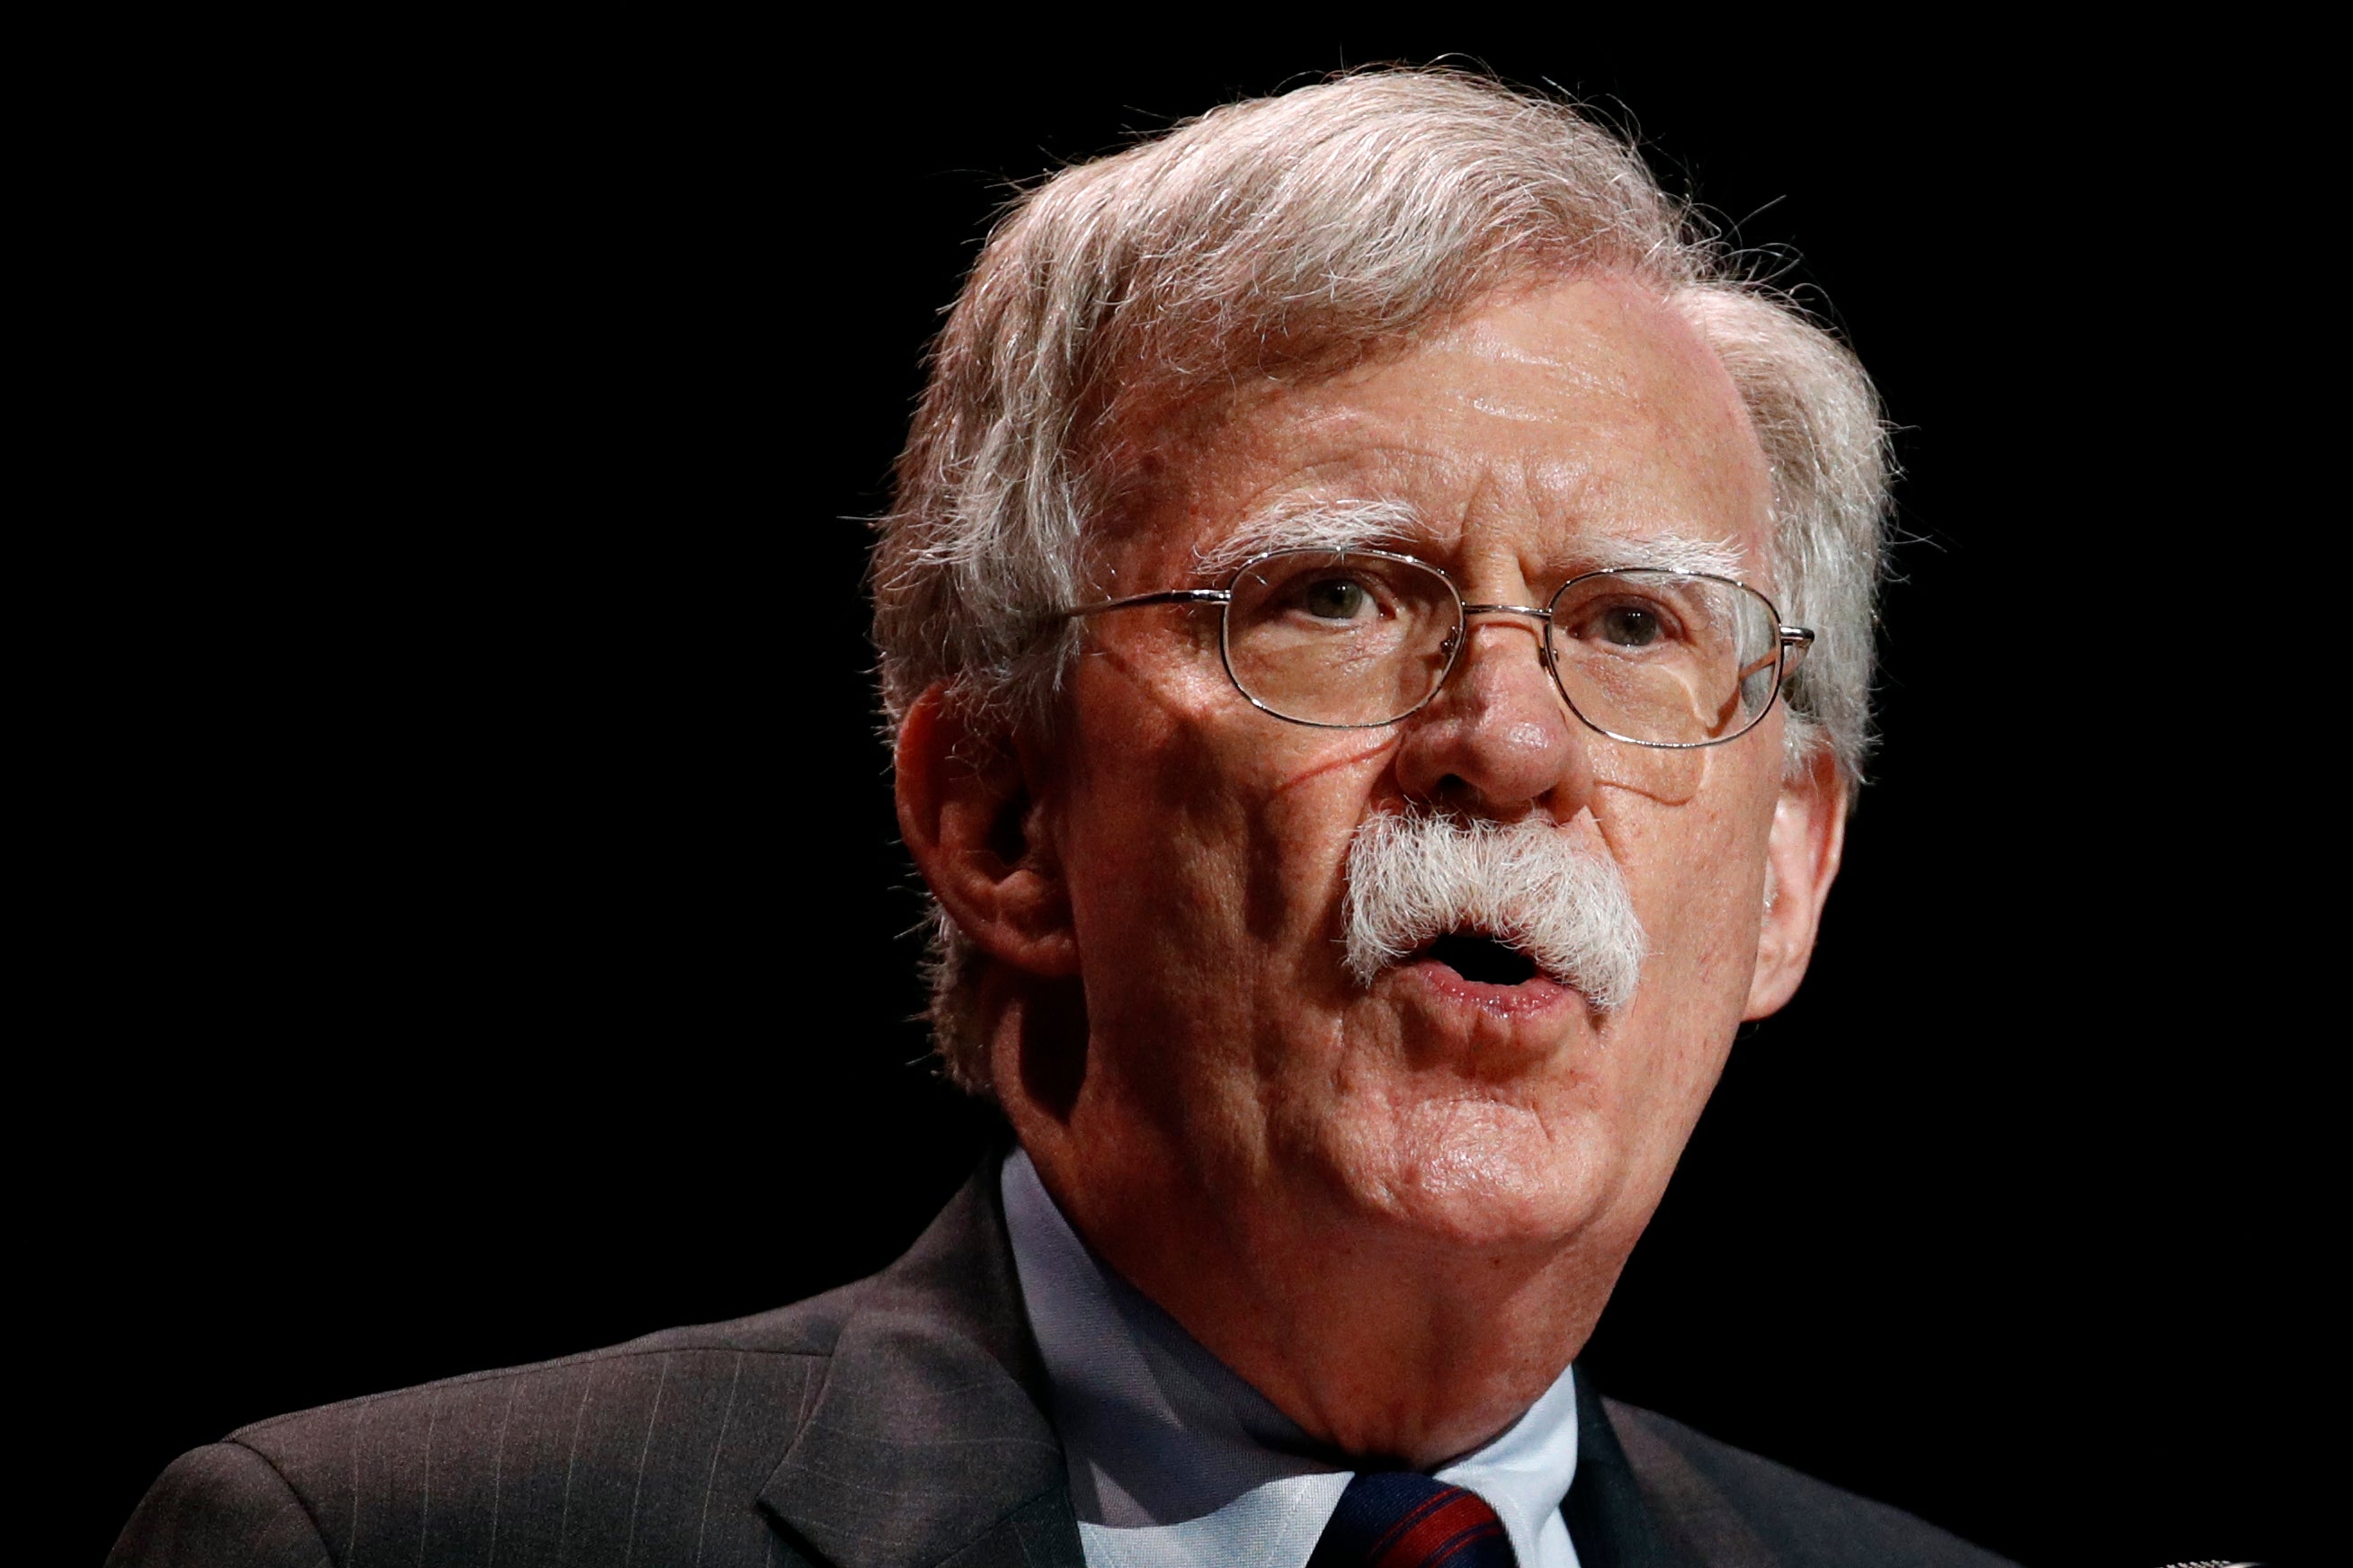 National security adviser John Bolton speaks at the Christians United for Israel annual summit in Washington